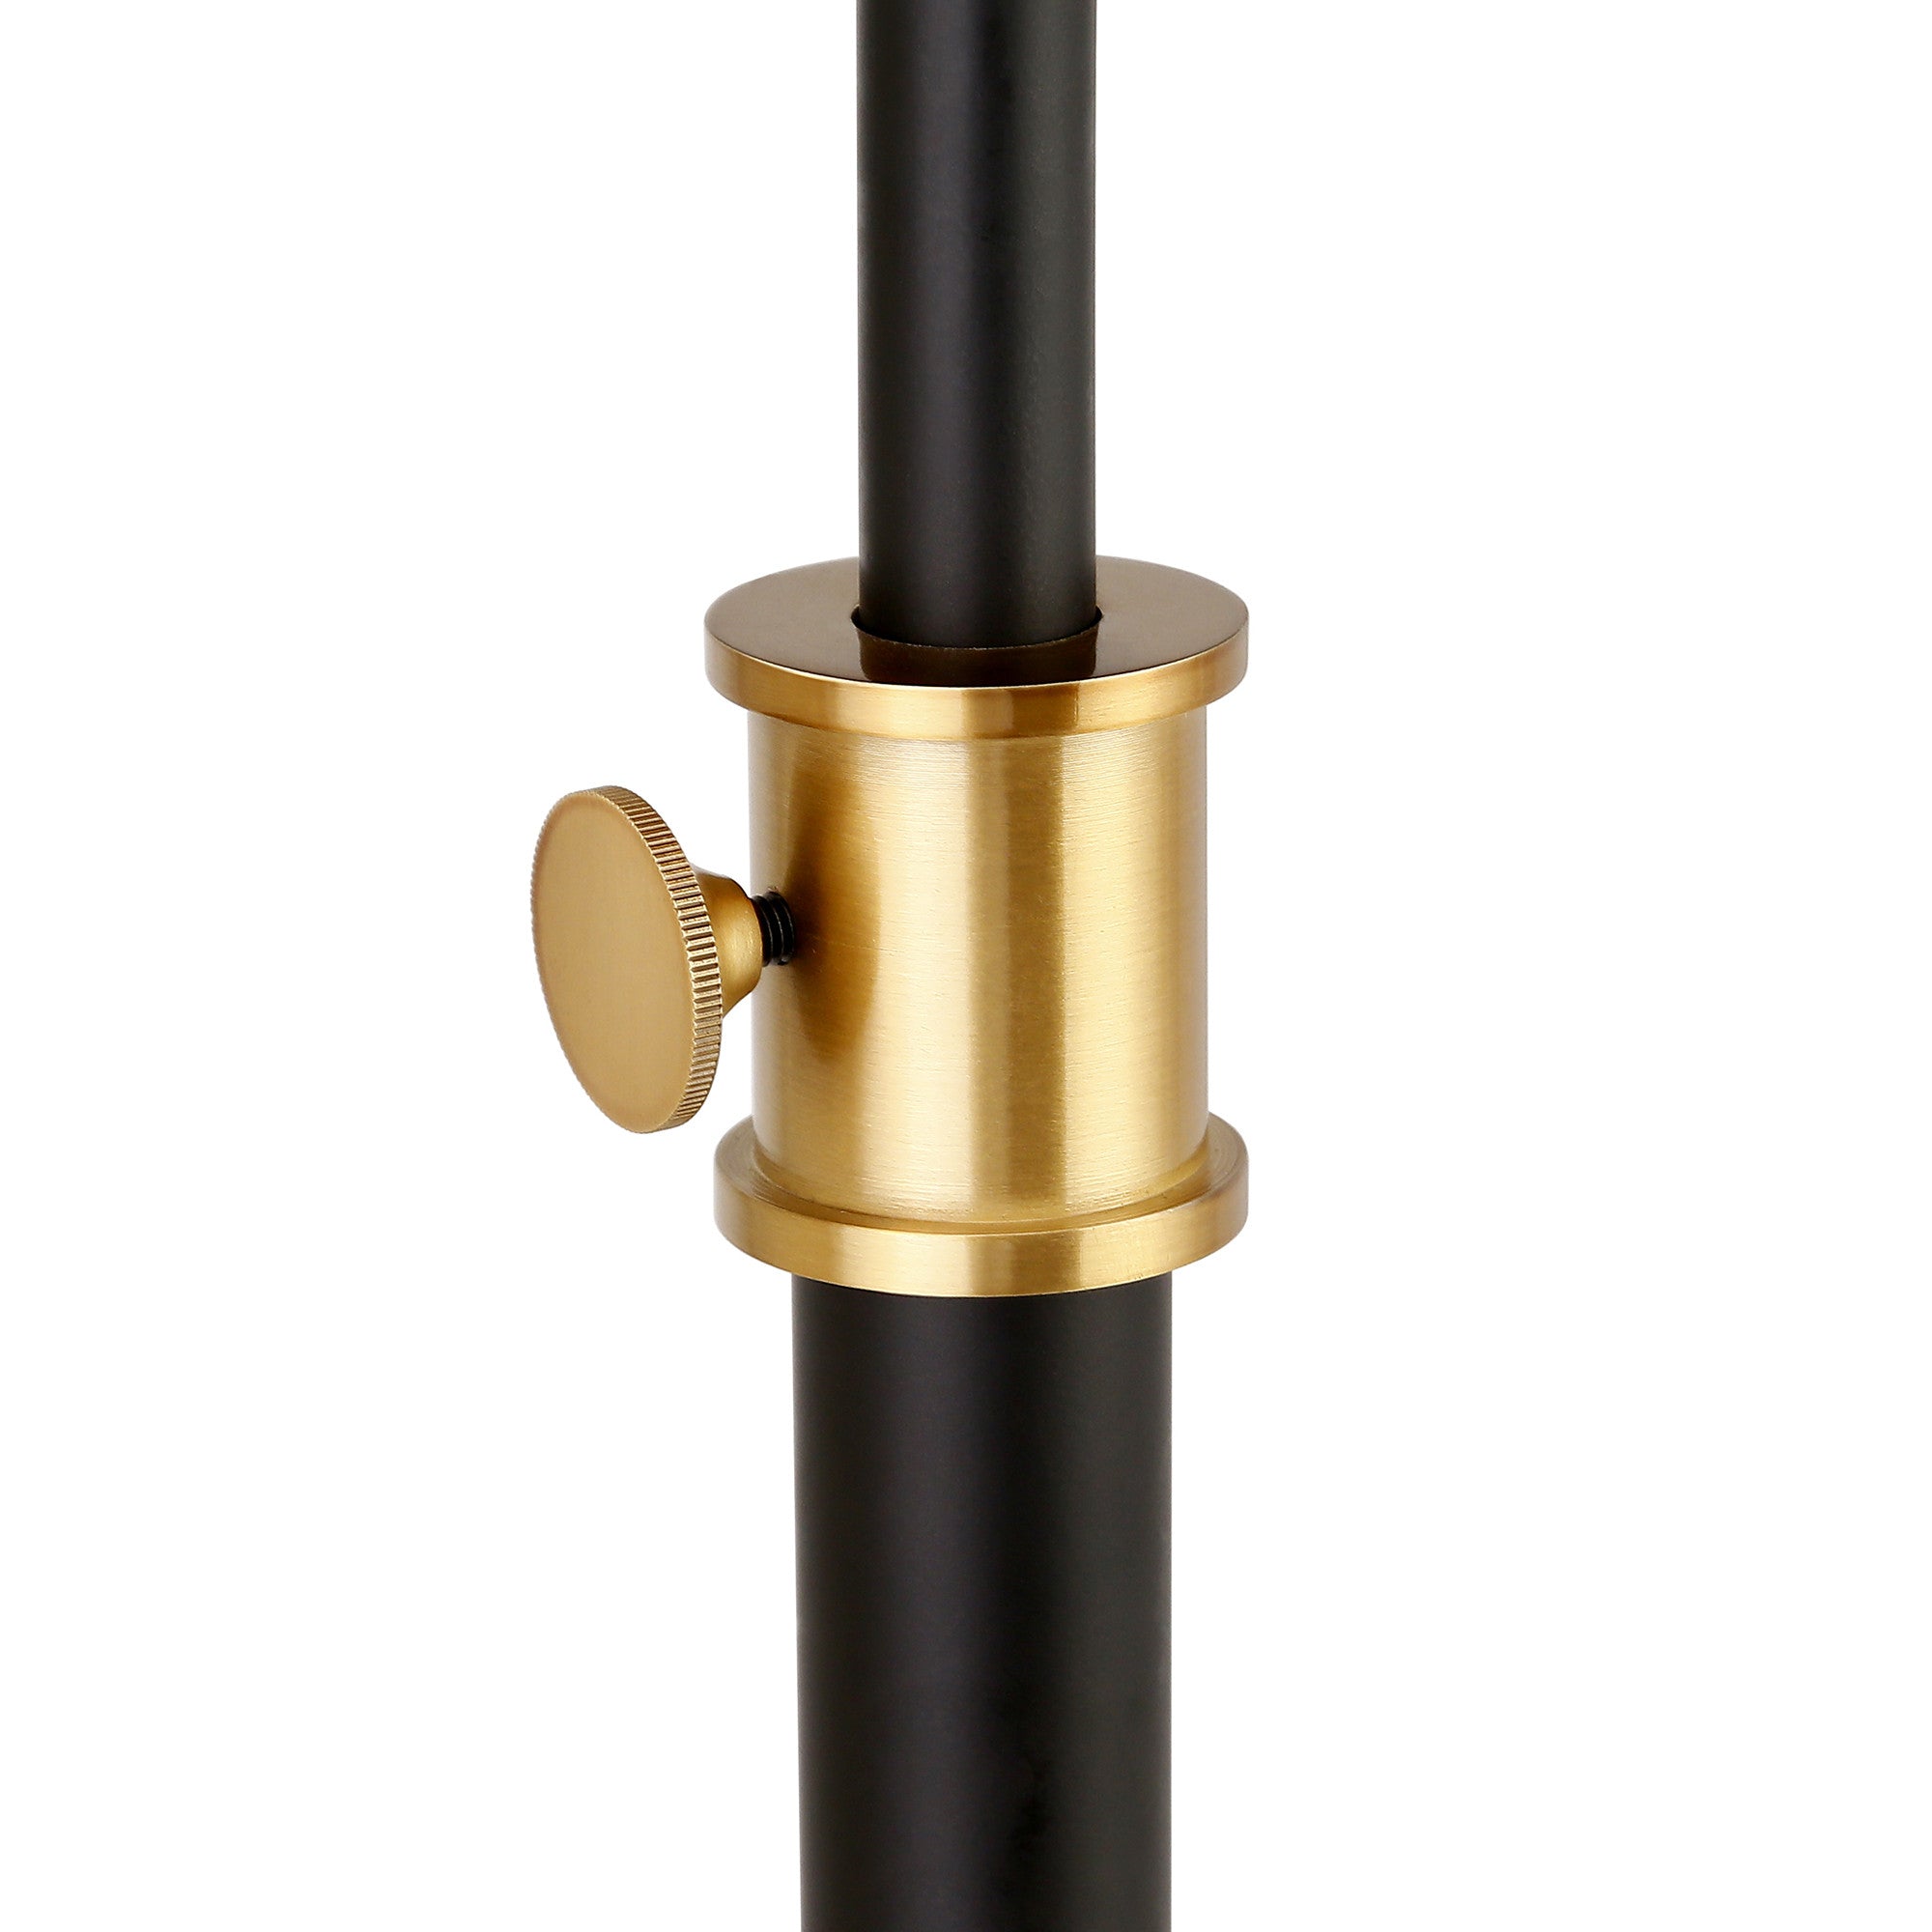 68" Black Adjustable Reading Floor Lamp With Black Dome Shade